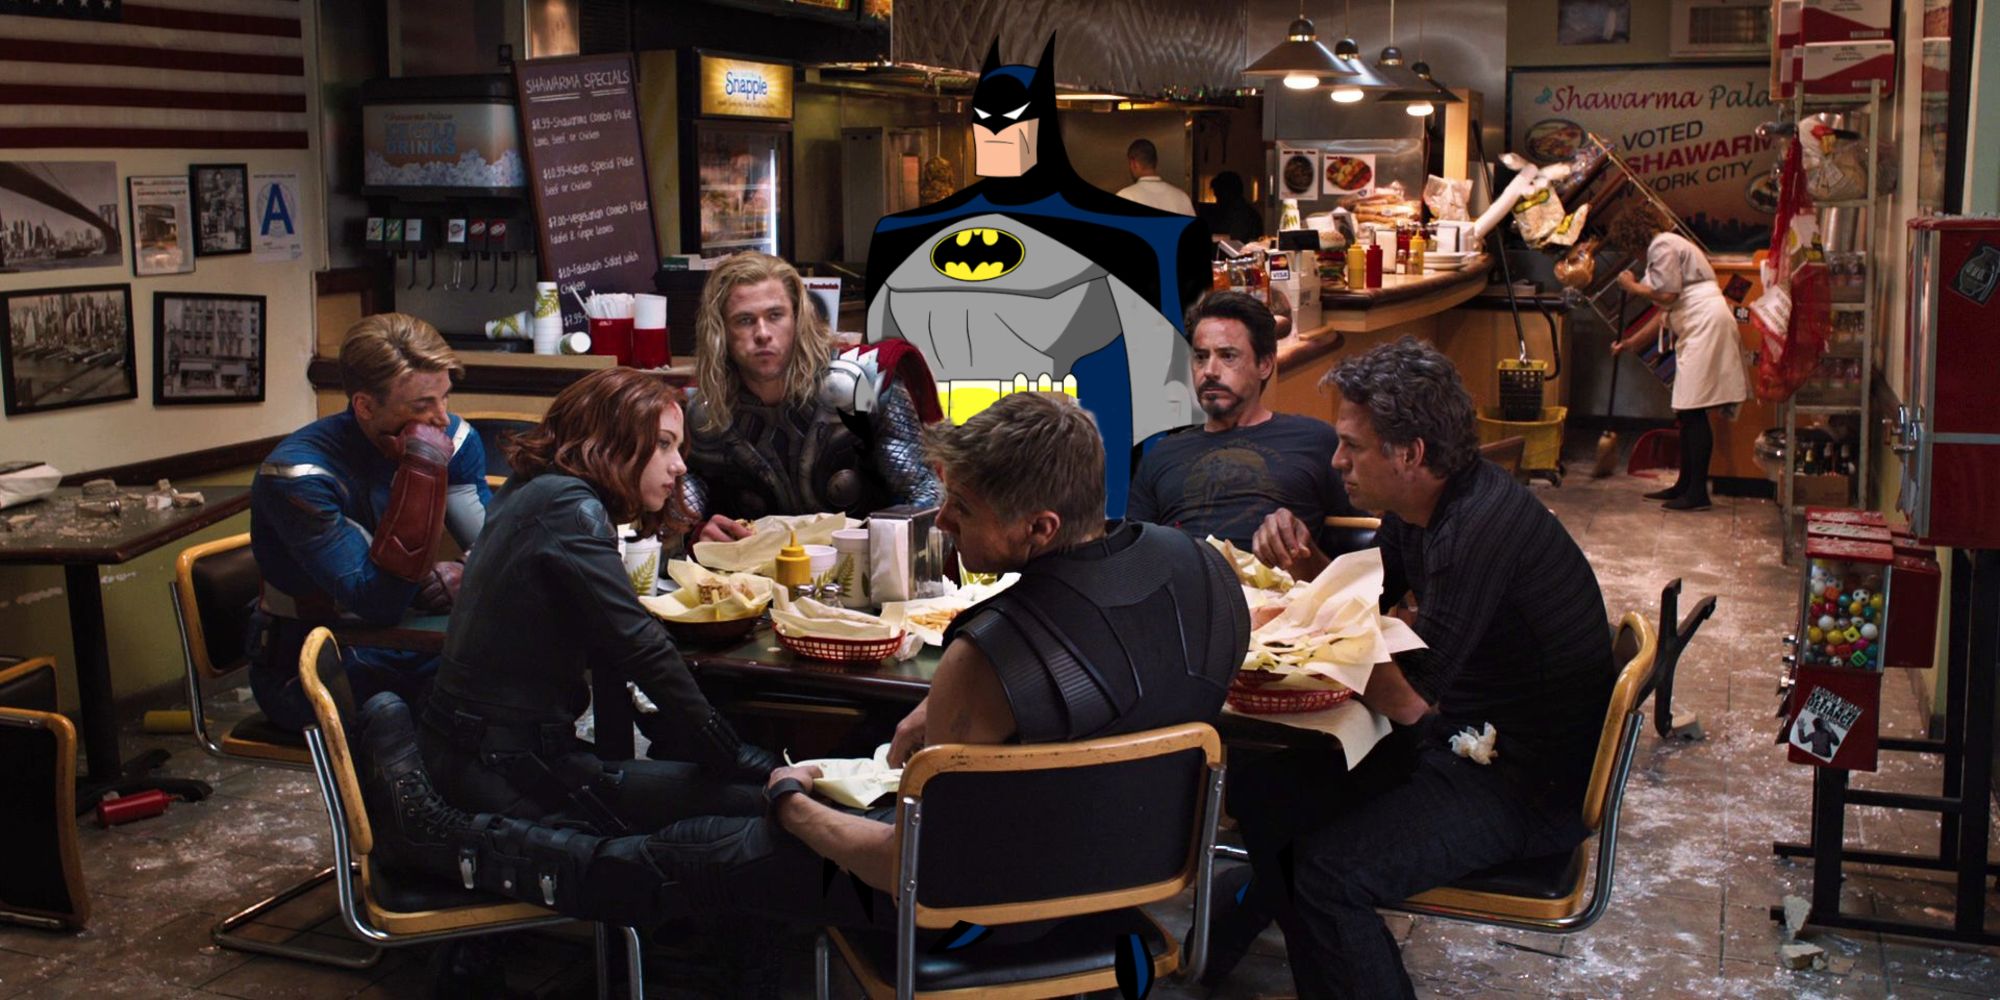 The Avengers Shawarma Scene Gets New Meaning Thanks To DC